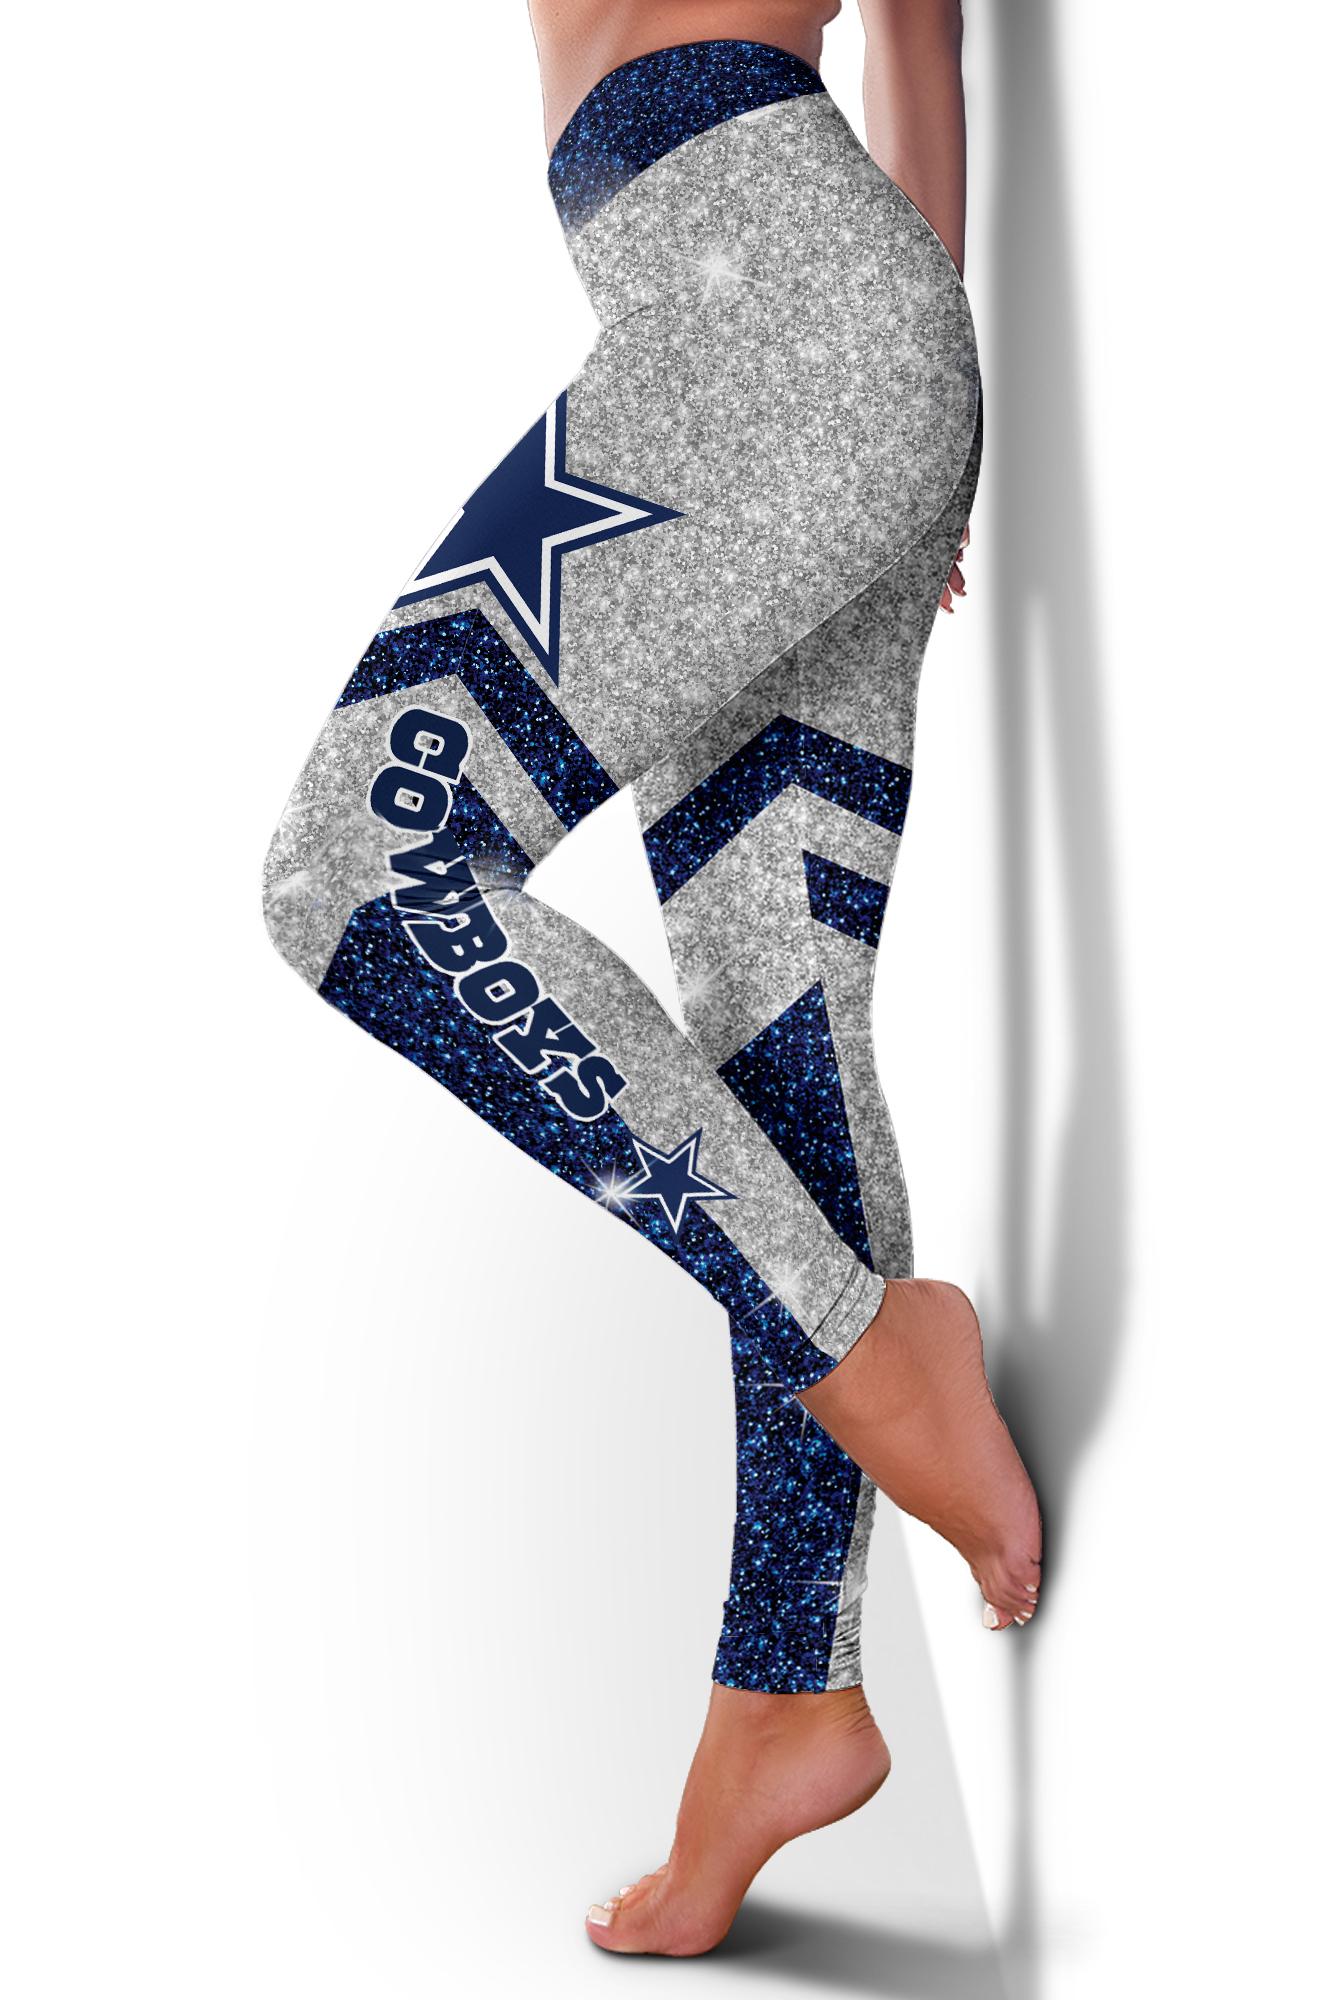 Stocktee Dallas Cowboys Limited Edition Women's All Over Print Full 3D ...